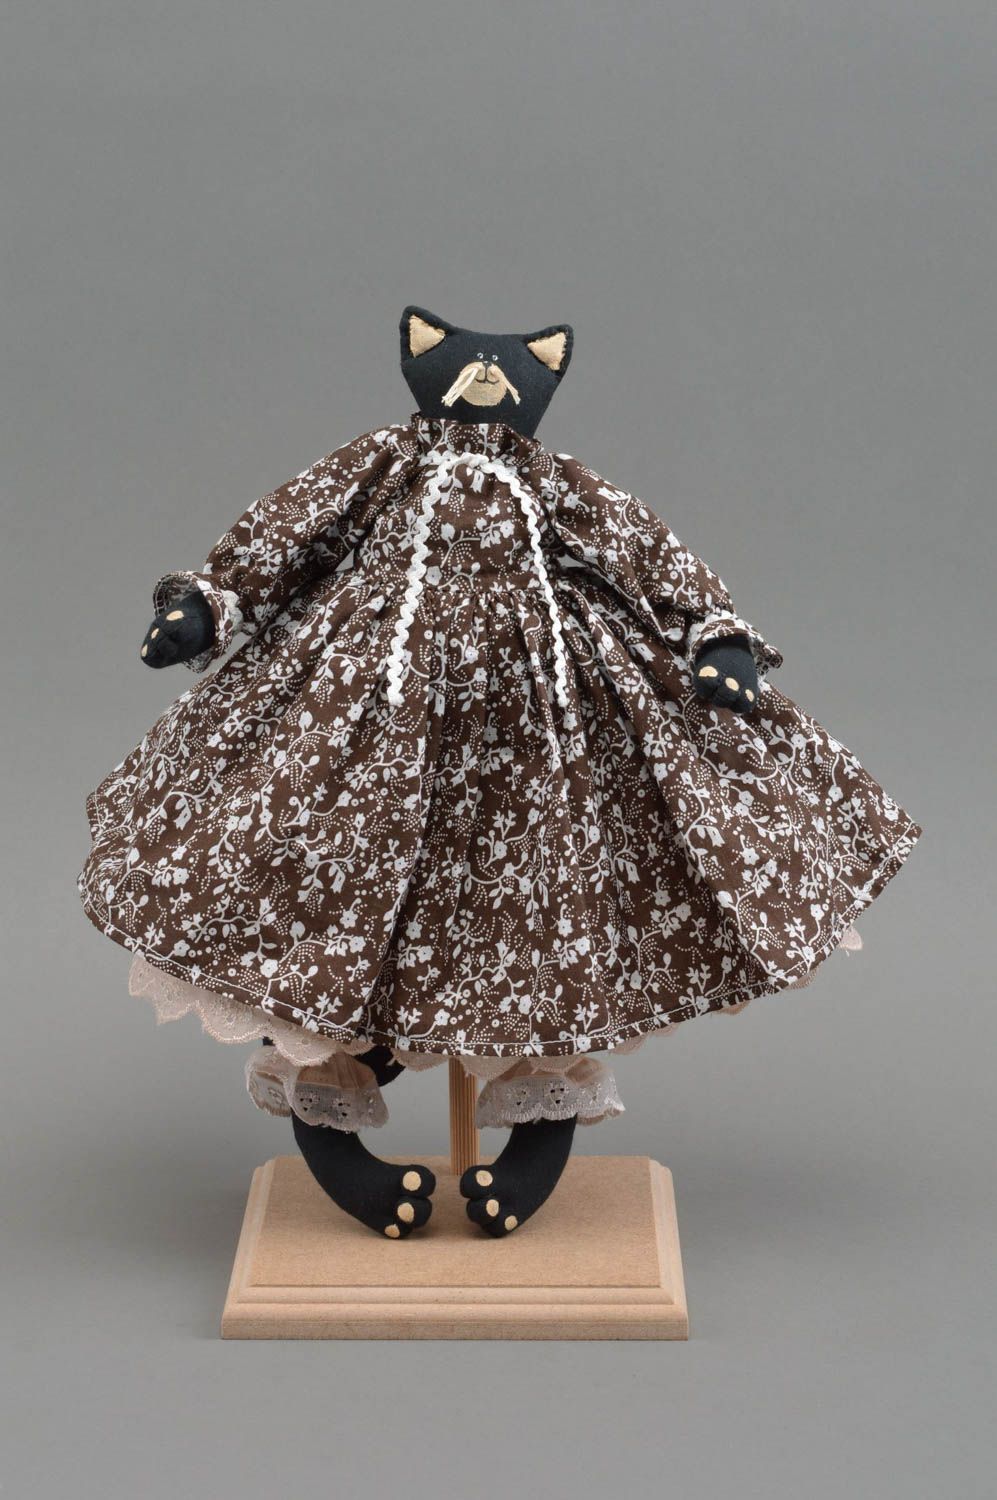 Fabric cat toy cat in black flowered dress handmade stuffed toy for baby photo 2